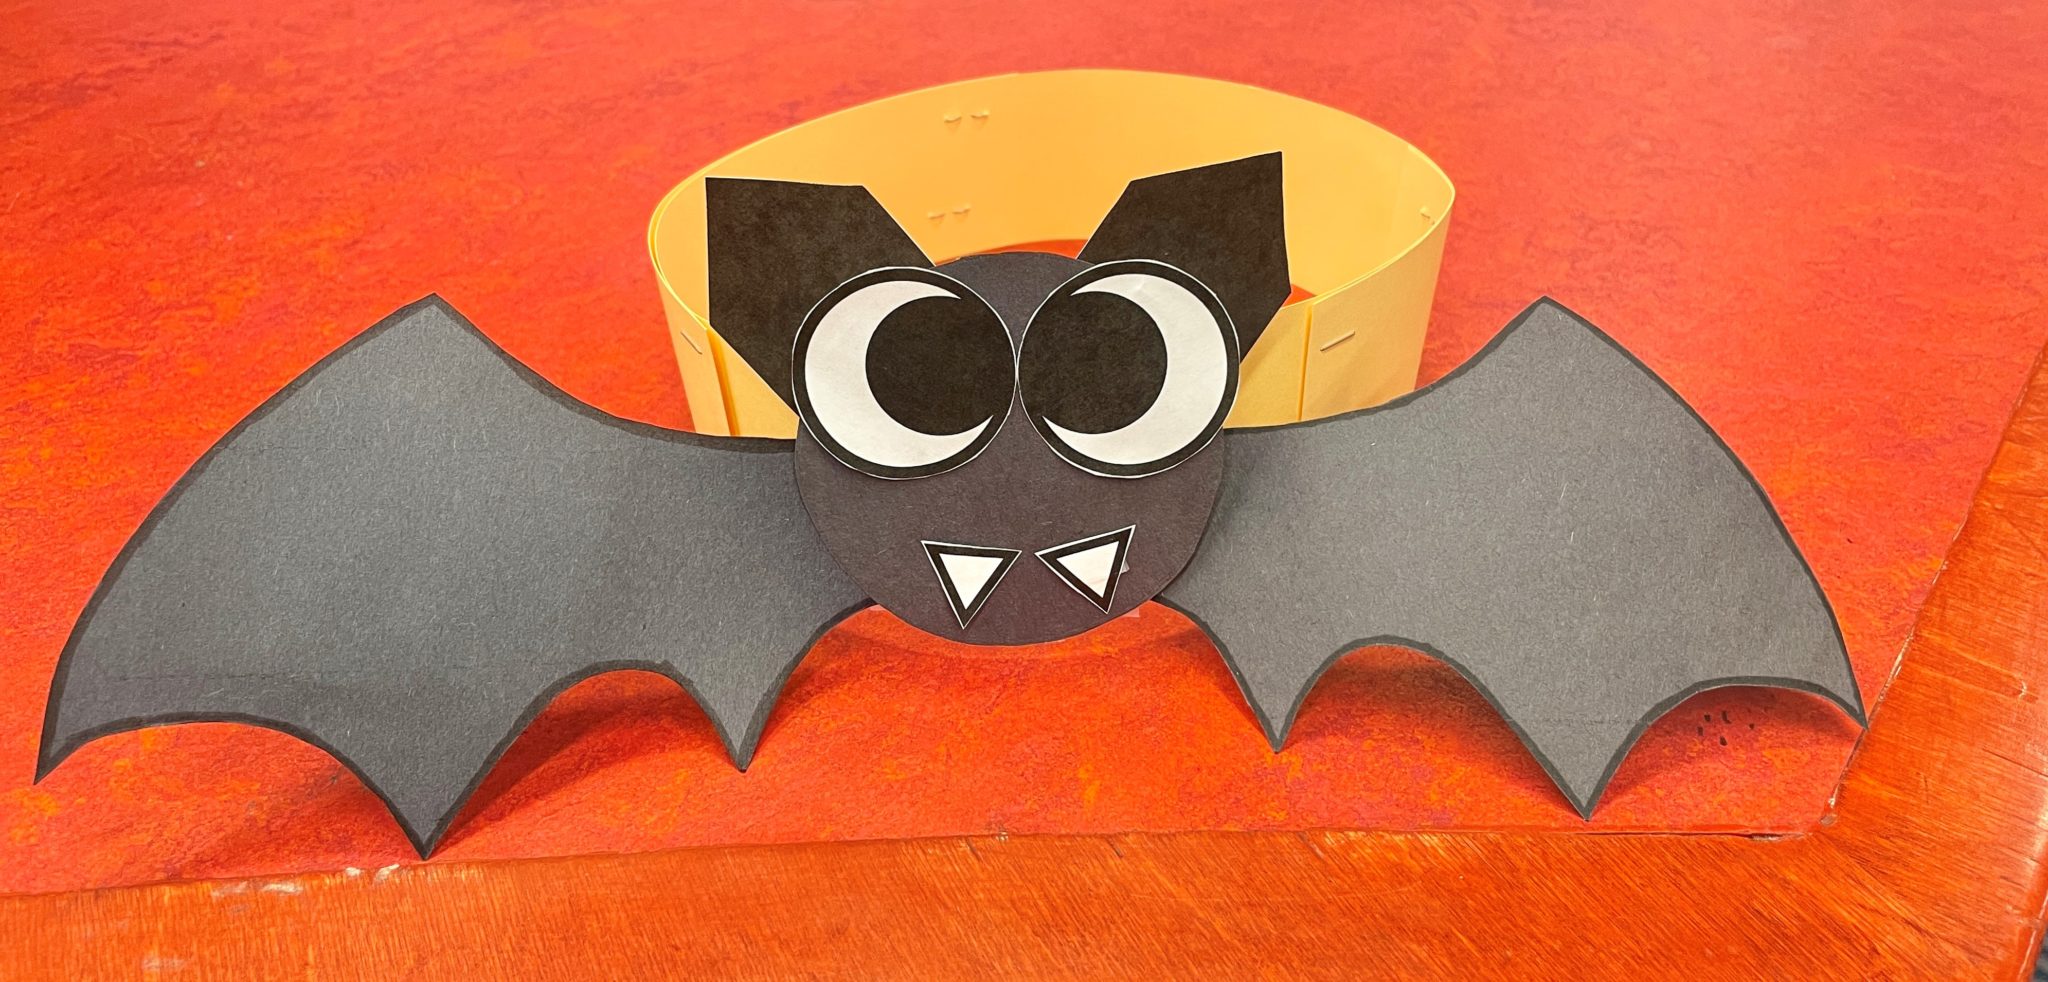 Photo of a papercraft bat headband on a red desk. The paper bat's face, ears, and wings are made of black construction paper with white fangs and huge black and white googly eyes. The bat face and wings are attached to a yellow strip of paper stapled in a circle.